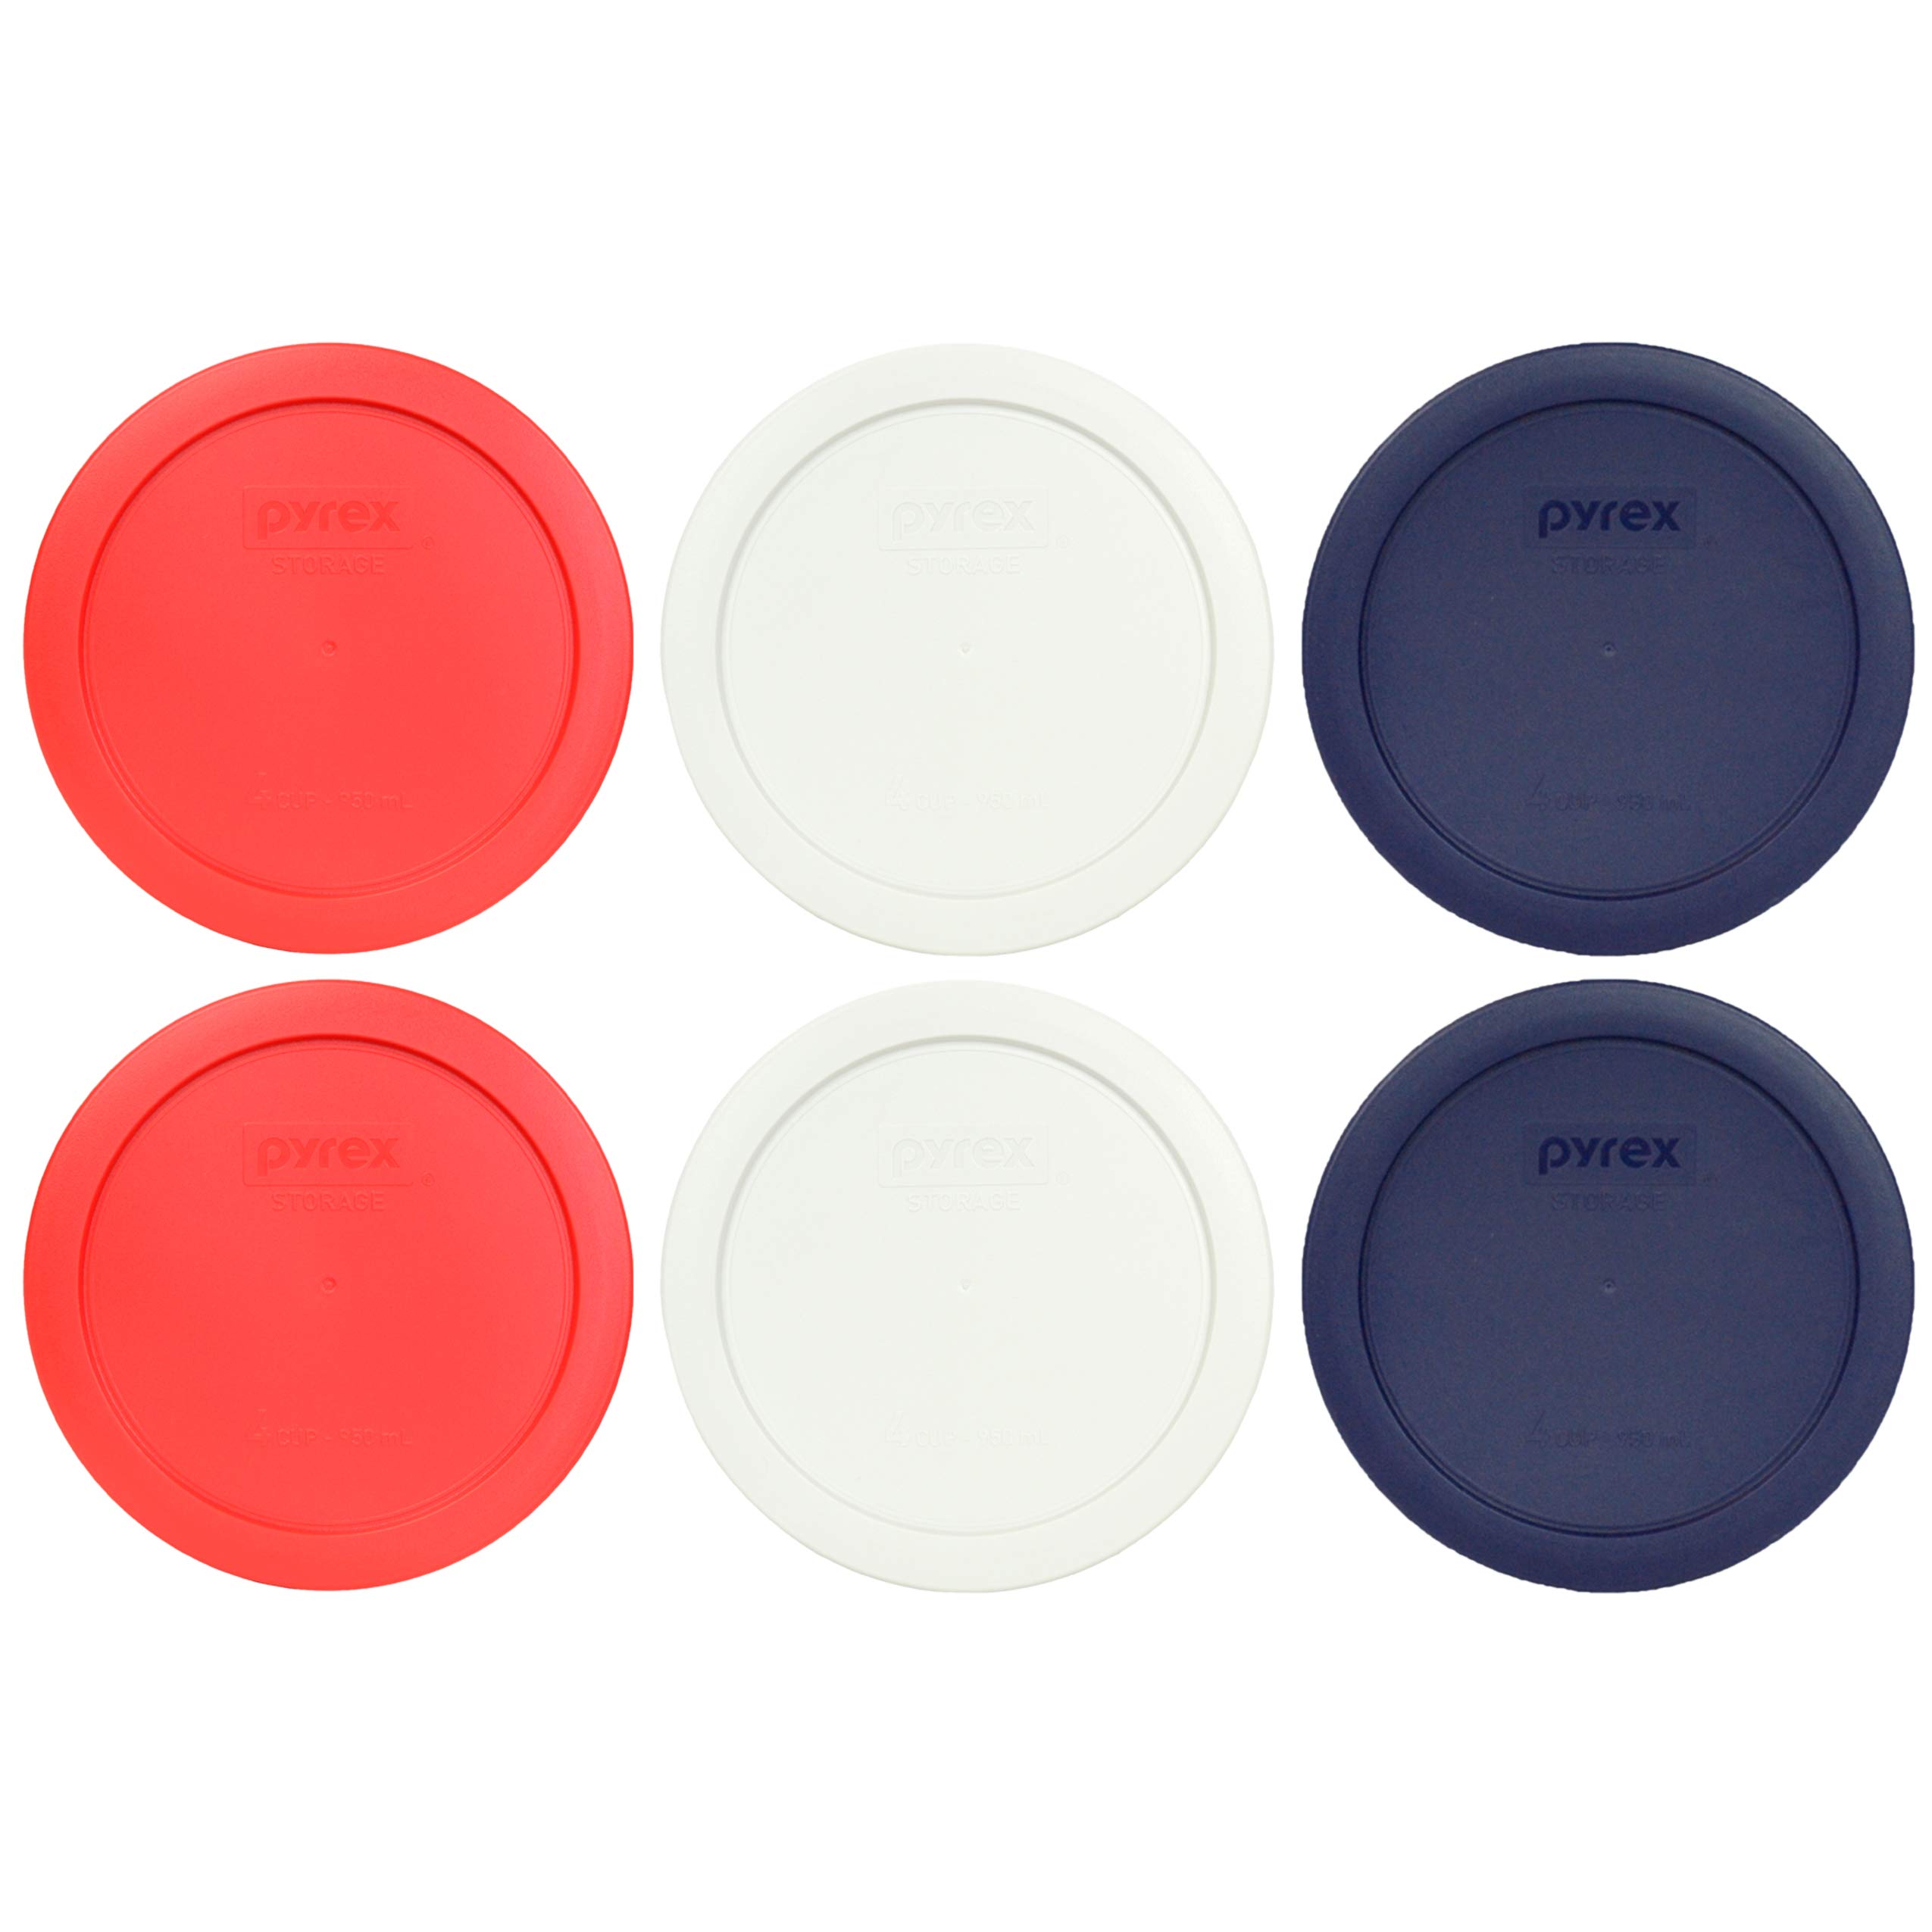 Pyrex 7201-PC 4 Cup (2) Red (2) White (2) Dark Blue Round Plastic Lids - 6 Pack Made in the USA